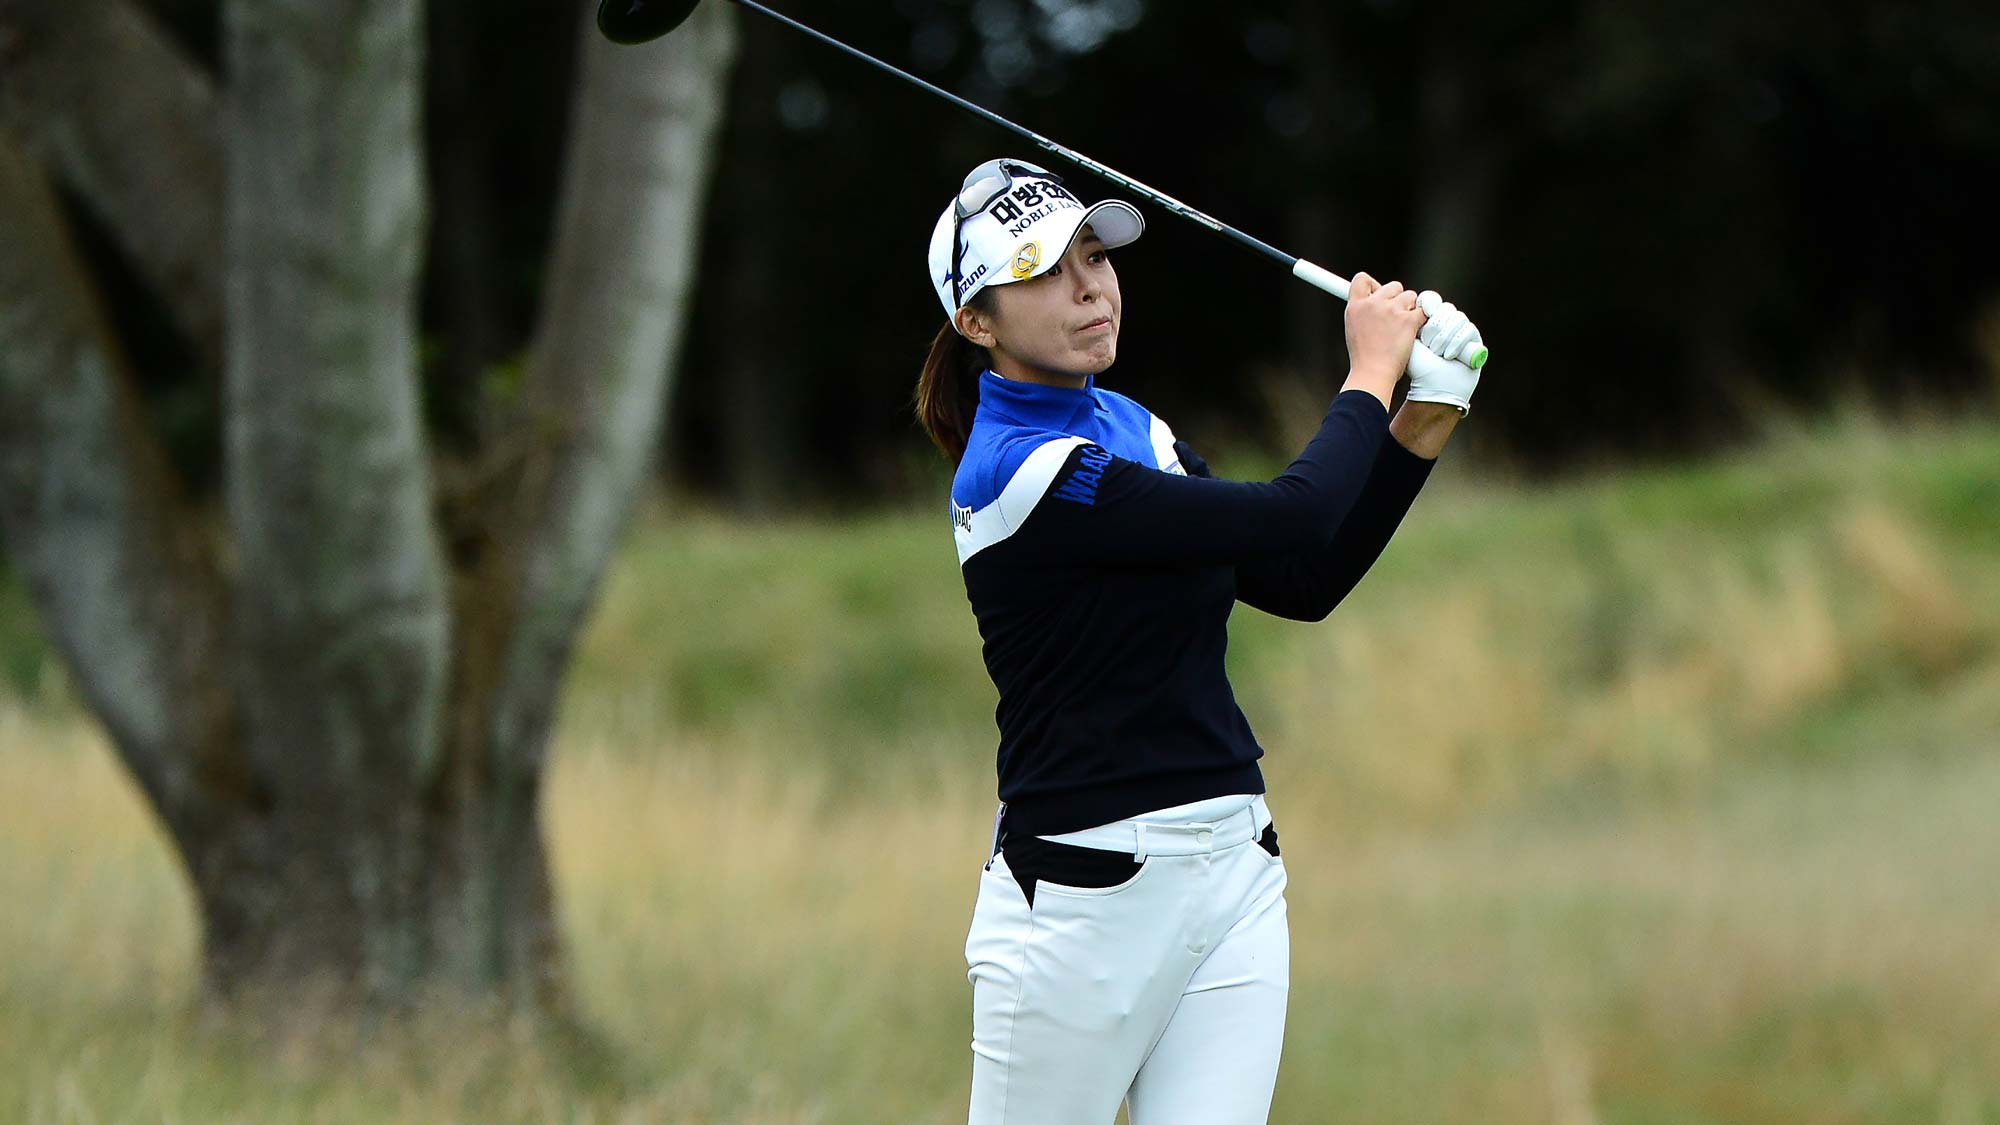 Mi Jung Hur of Korea plays her tee shot at the 2nd hole during the final day of the Aberdeen Standard Investment Scottish Open